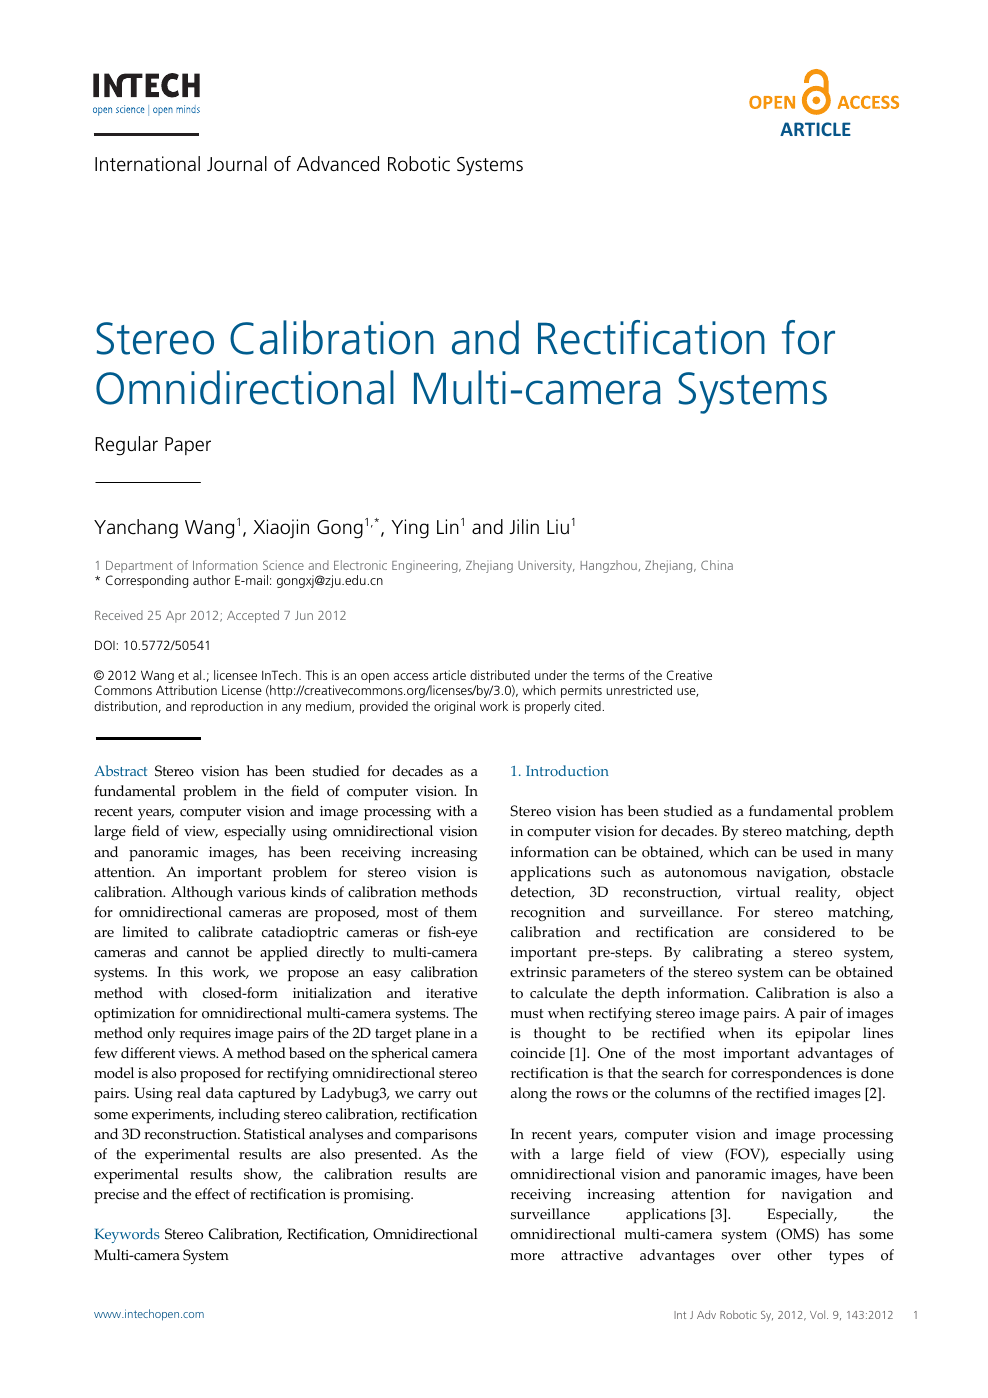 Stereo Calibration And Rectification For Omnidirectional Multi